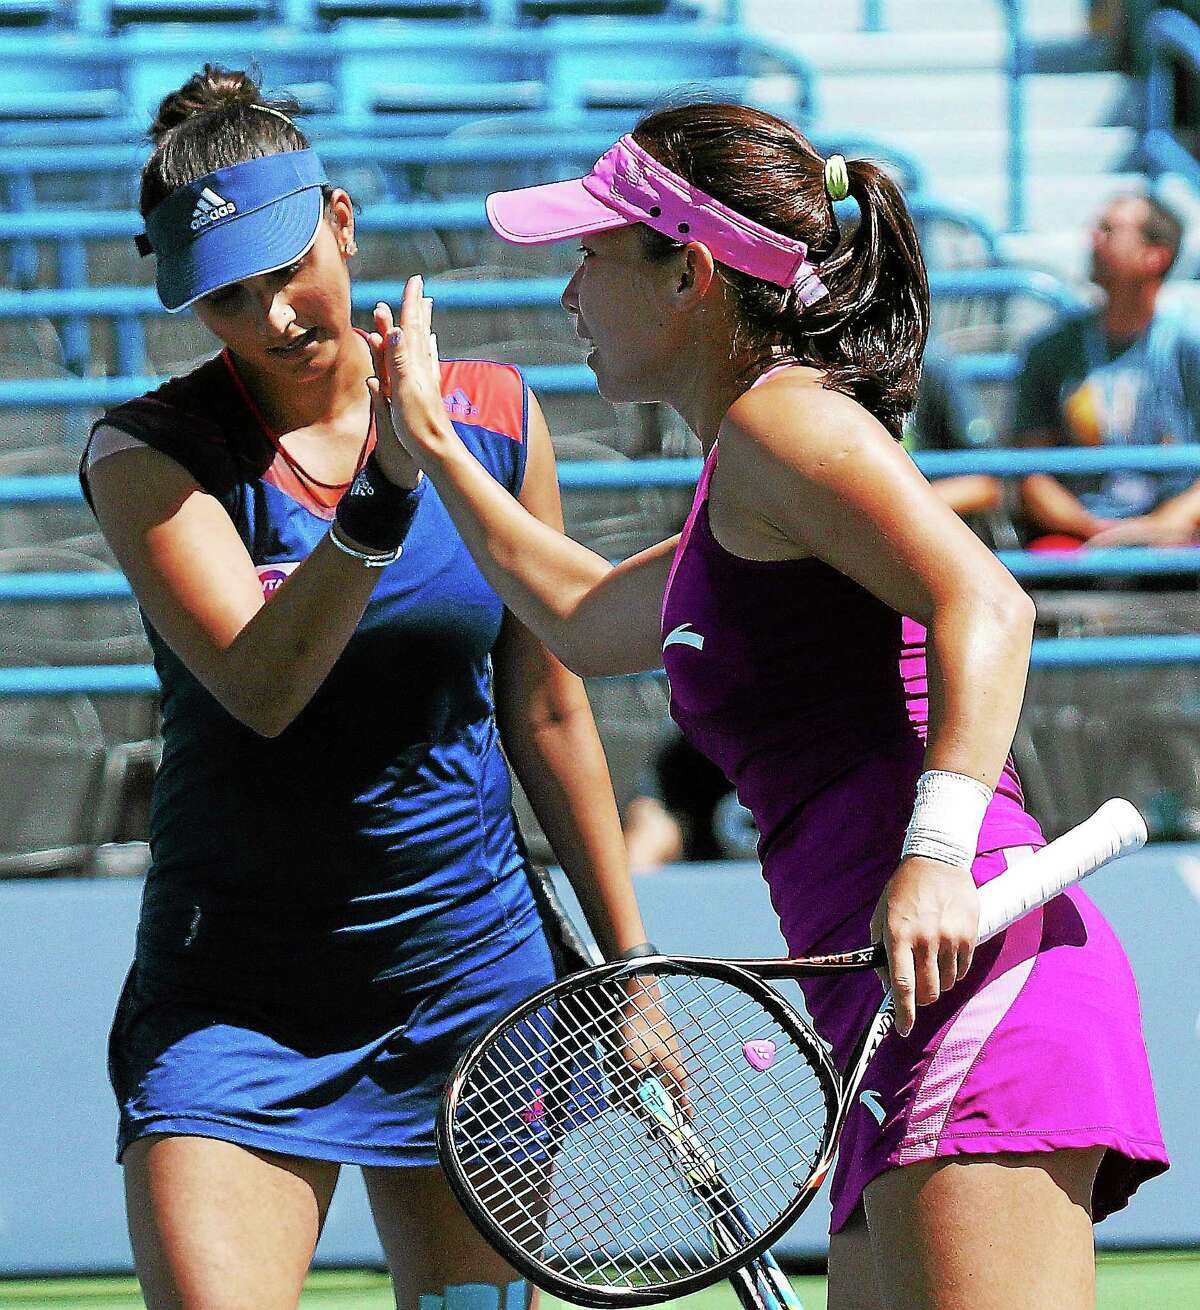 (Peter Casolino — New Haven Register) Sania Mirza, left, and Jie Zheng react as they beat Anabel Medina Garrigues and Katarina Srebotnik during the doubles finals.